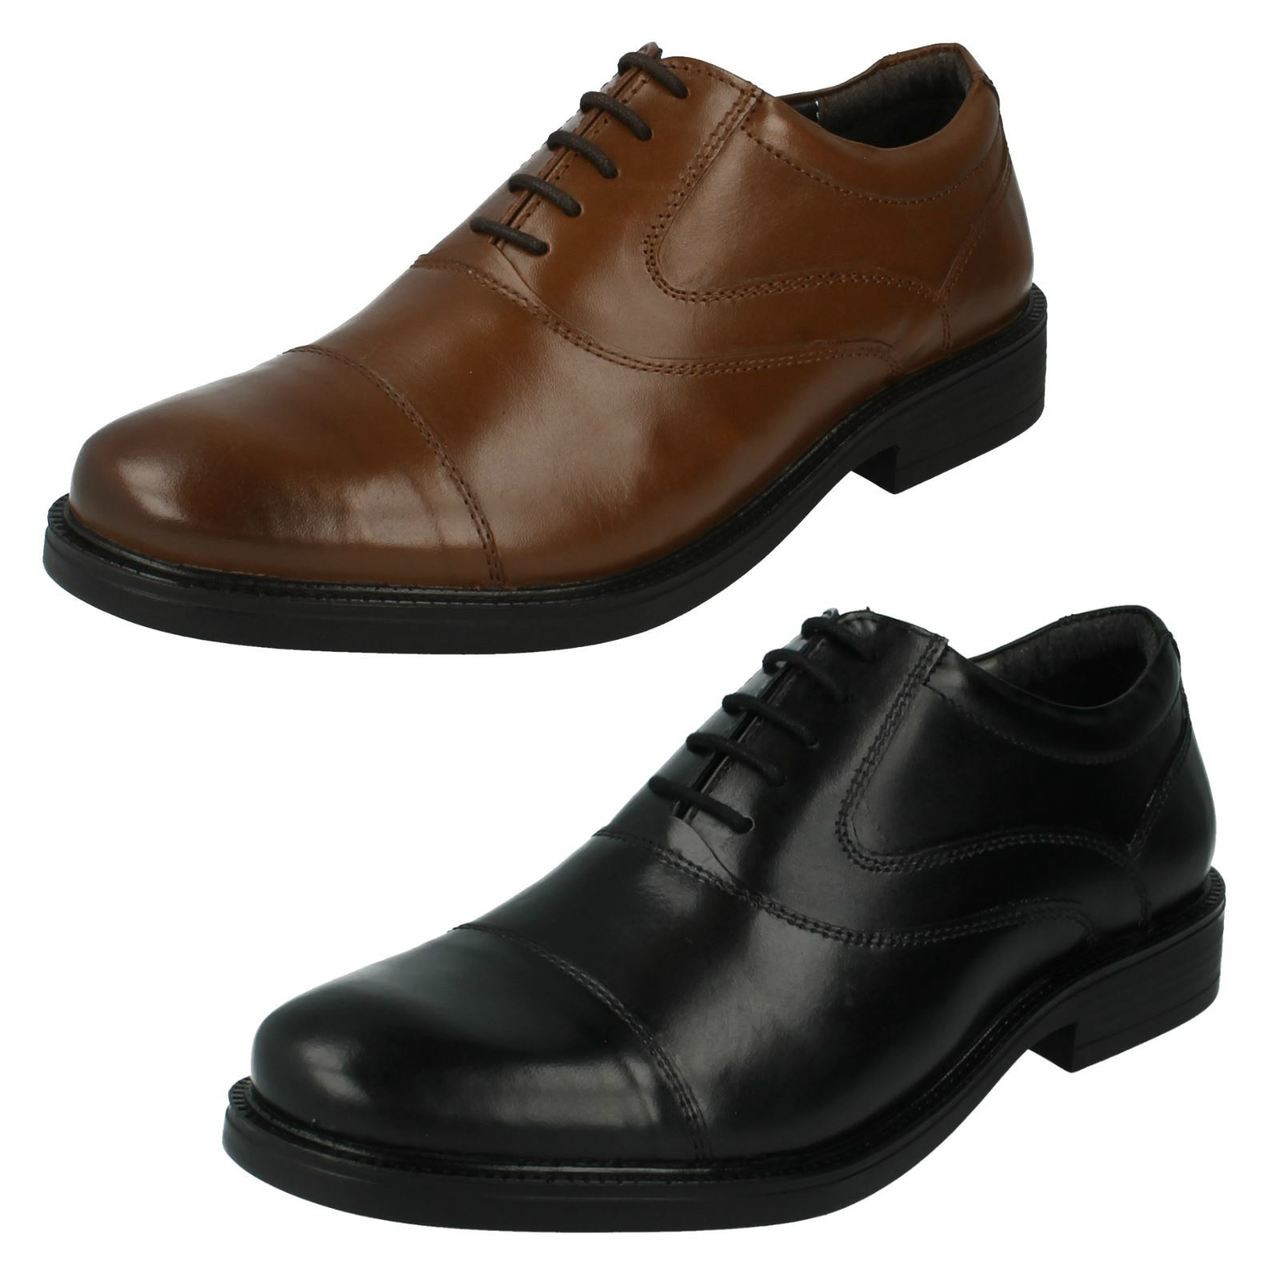 Dwell Fritagelse Zoom ind Mens Hush Puppies Formal Shoes Rockford Oxford CT